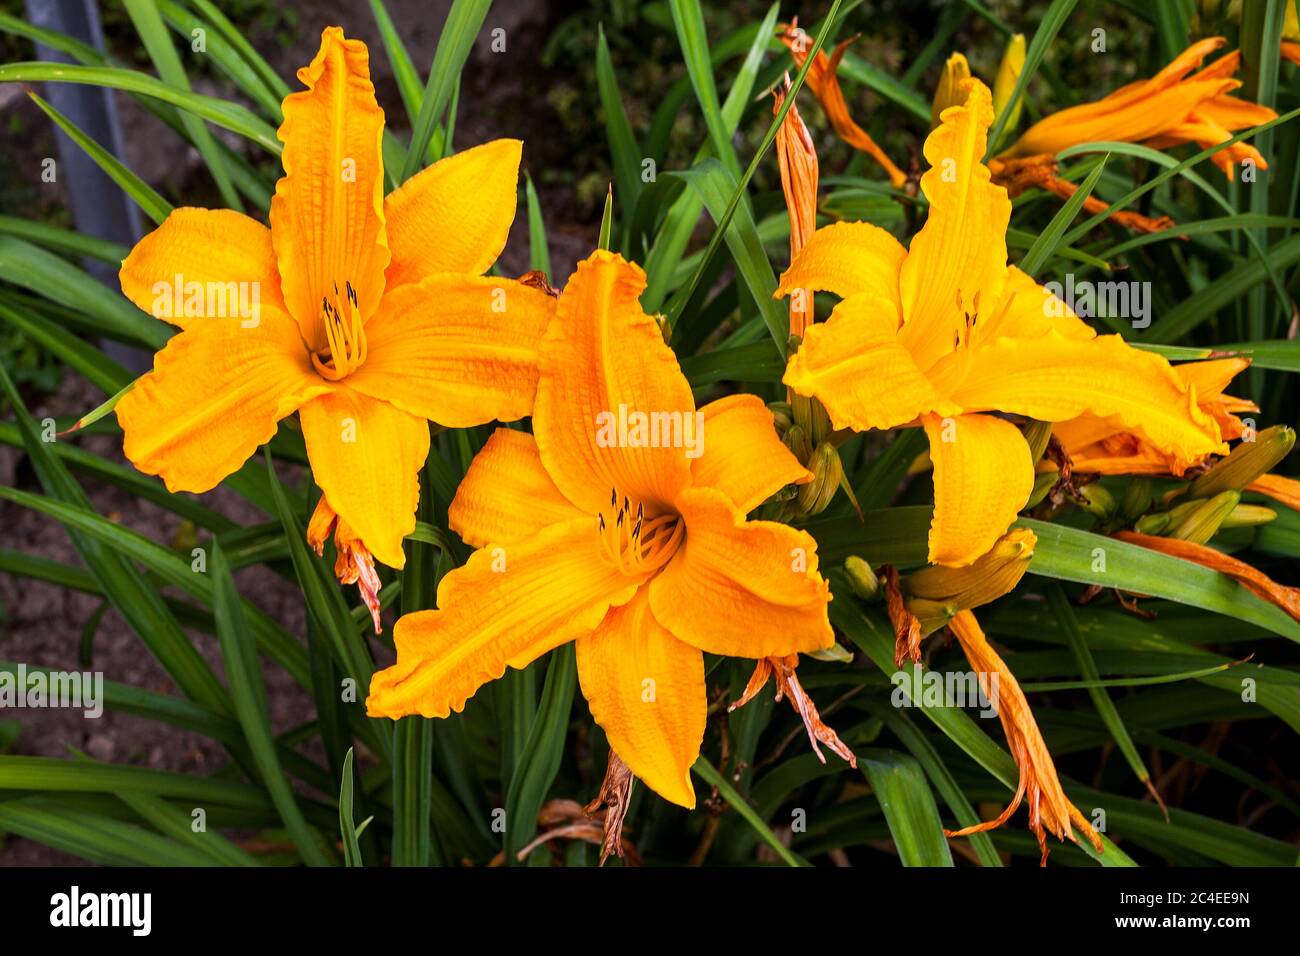 Hemerocallis 'Burning Daylight' a spring flowering plant commonly known as daylily Stock Photo